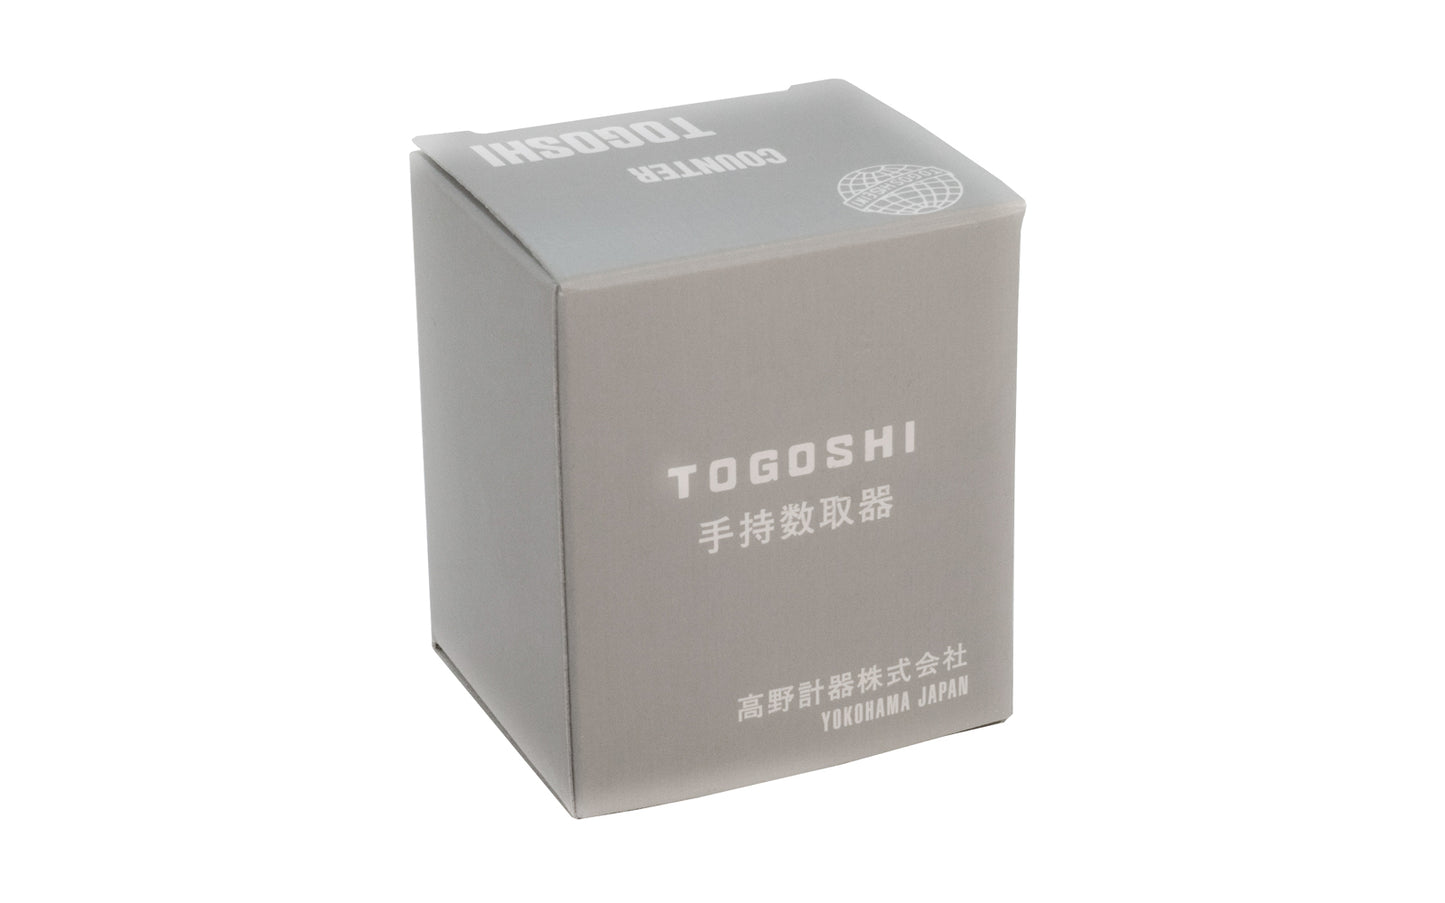 Japanese Togoshi Hand Tally Counter. A high quality Japanese Hand Tally Counter made by Togoshi in Japan. It’s a nickel-plated, precision-engineered hand held counter that can register up to four-figure with a reset button. Great for counting during harvest time. Made in Japan. 083114001200